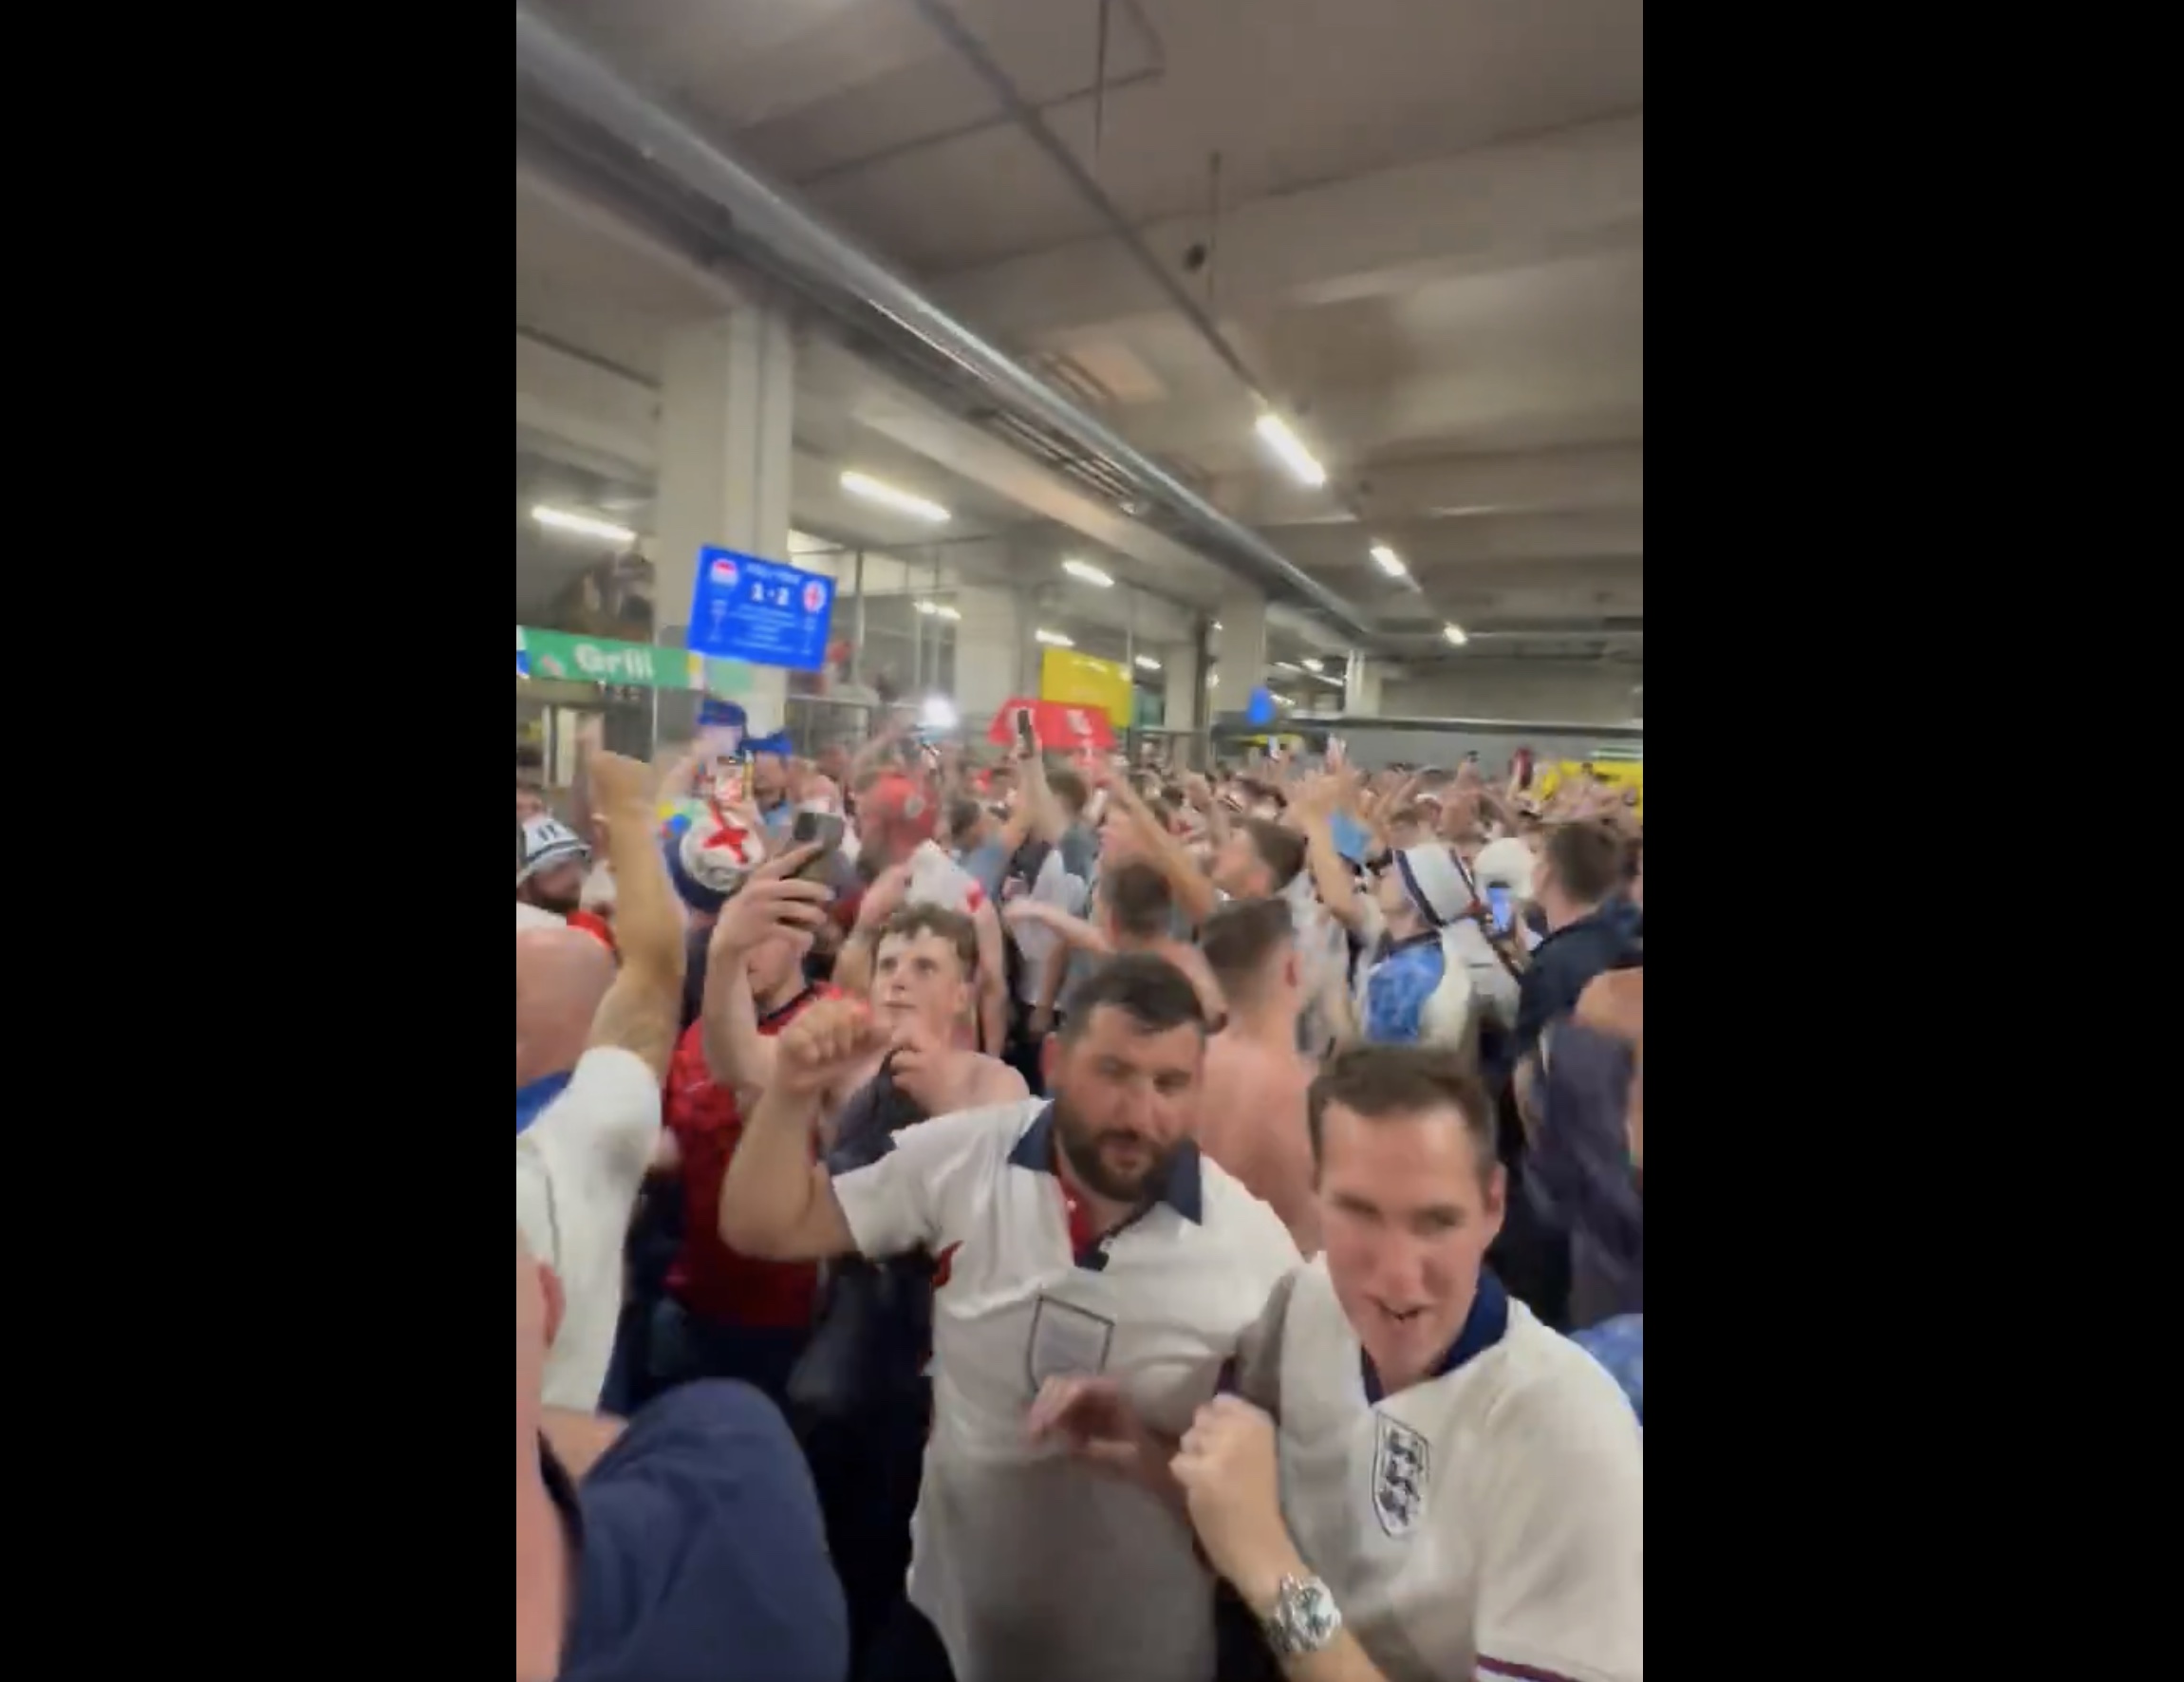 (Video) “We’re not going home” – England fans celebrate last gasp win over the Netherlands